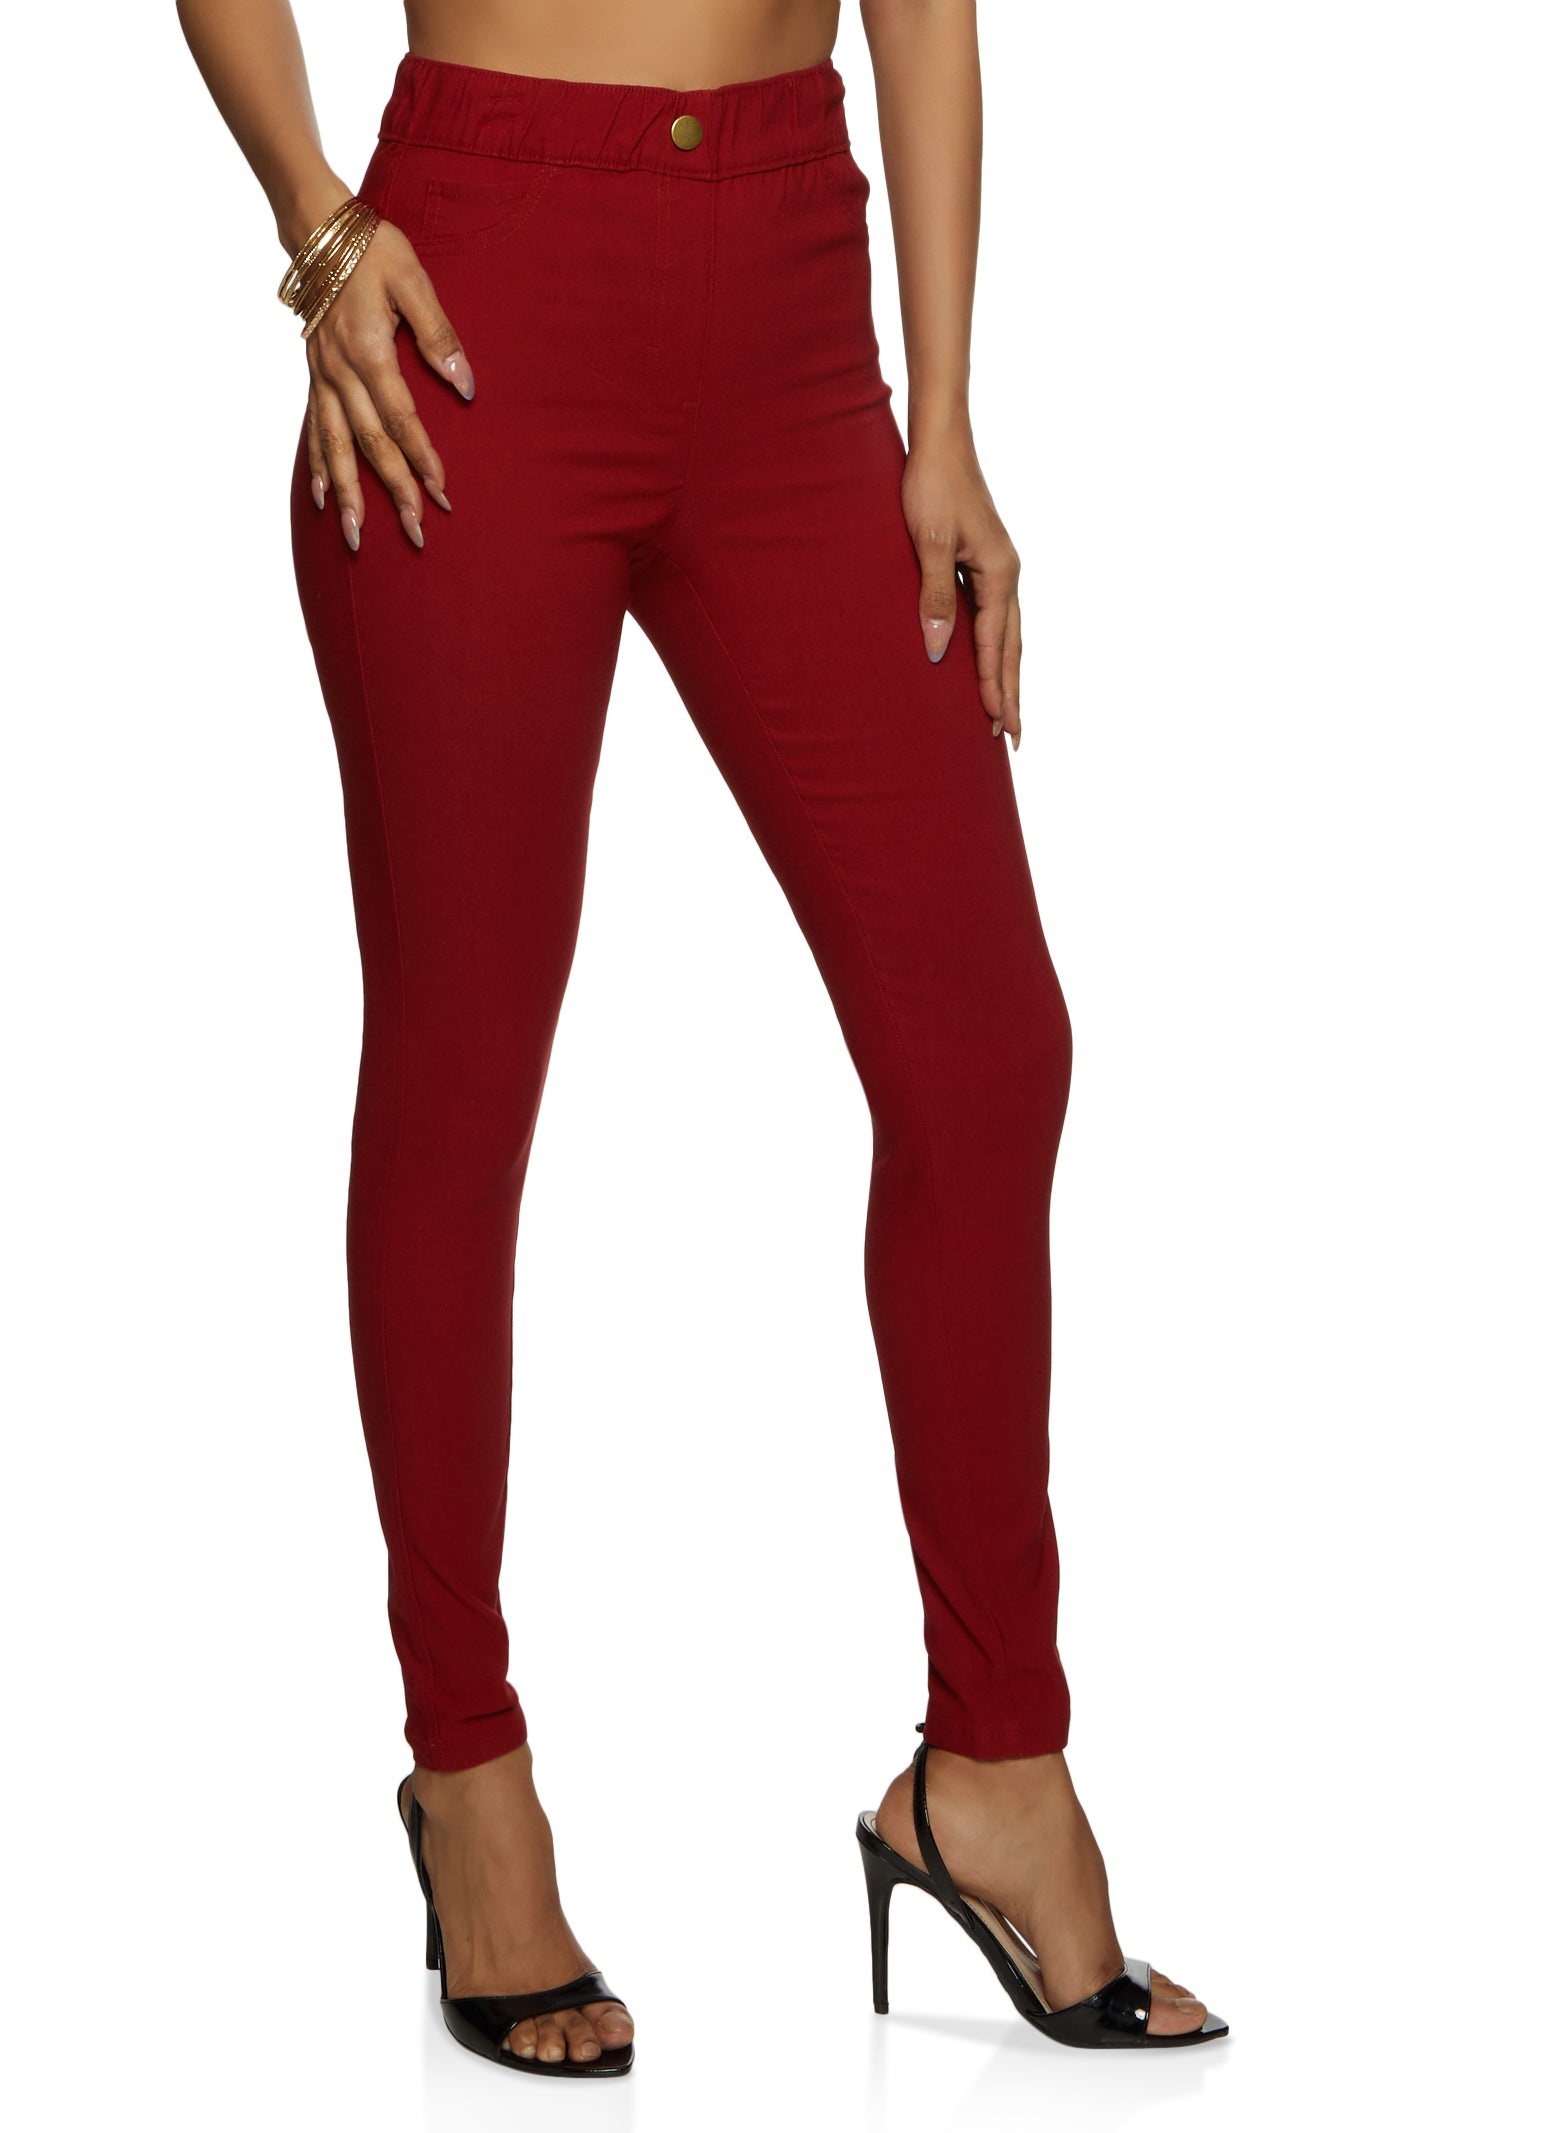 Womens Burgundy Pants, Everyday Low Prices